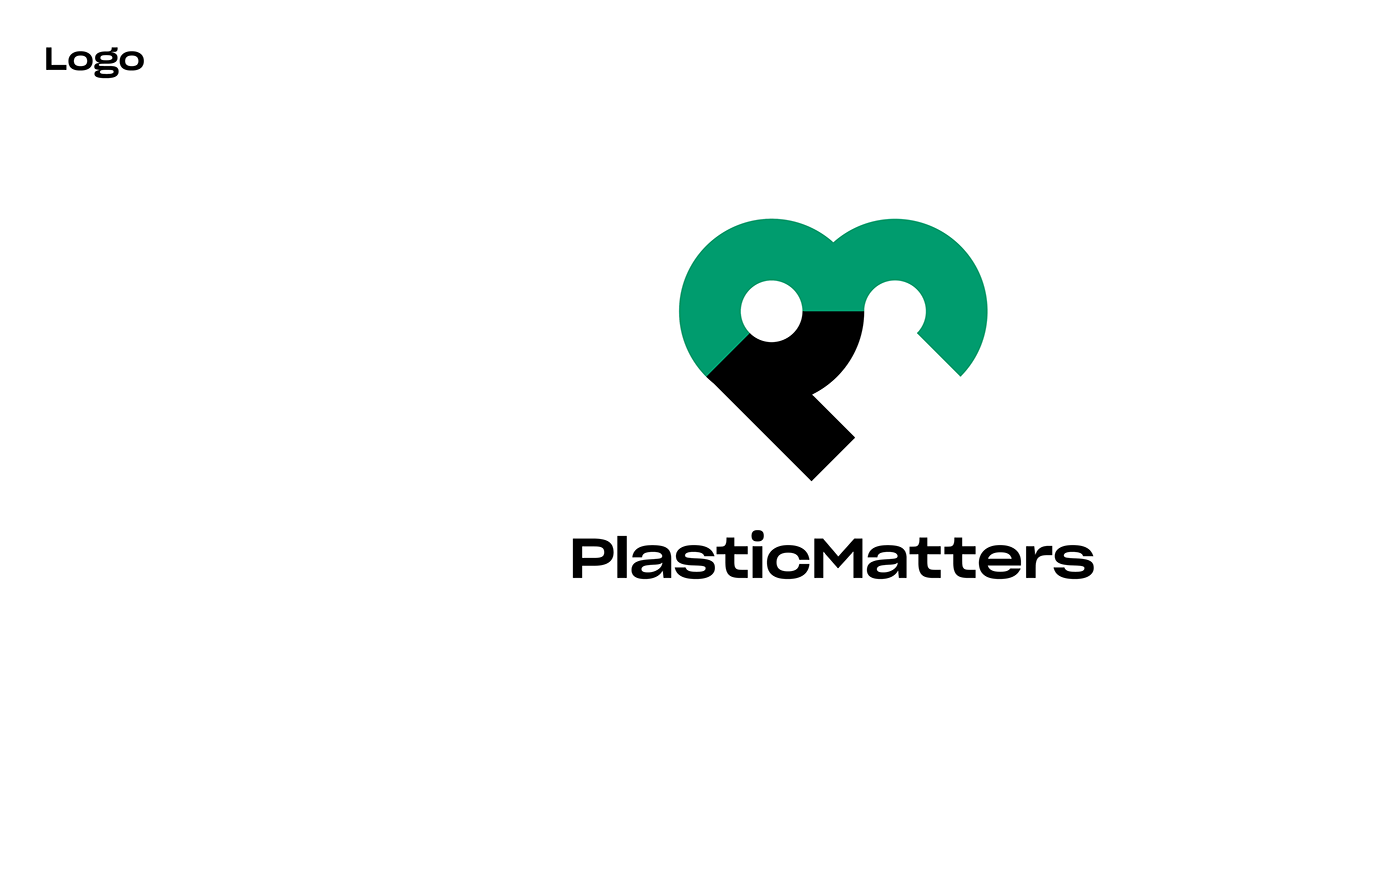 plastic pollution campaign posters sharp grotesk adobeawards